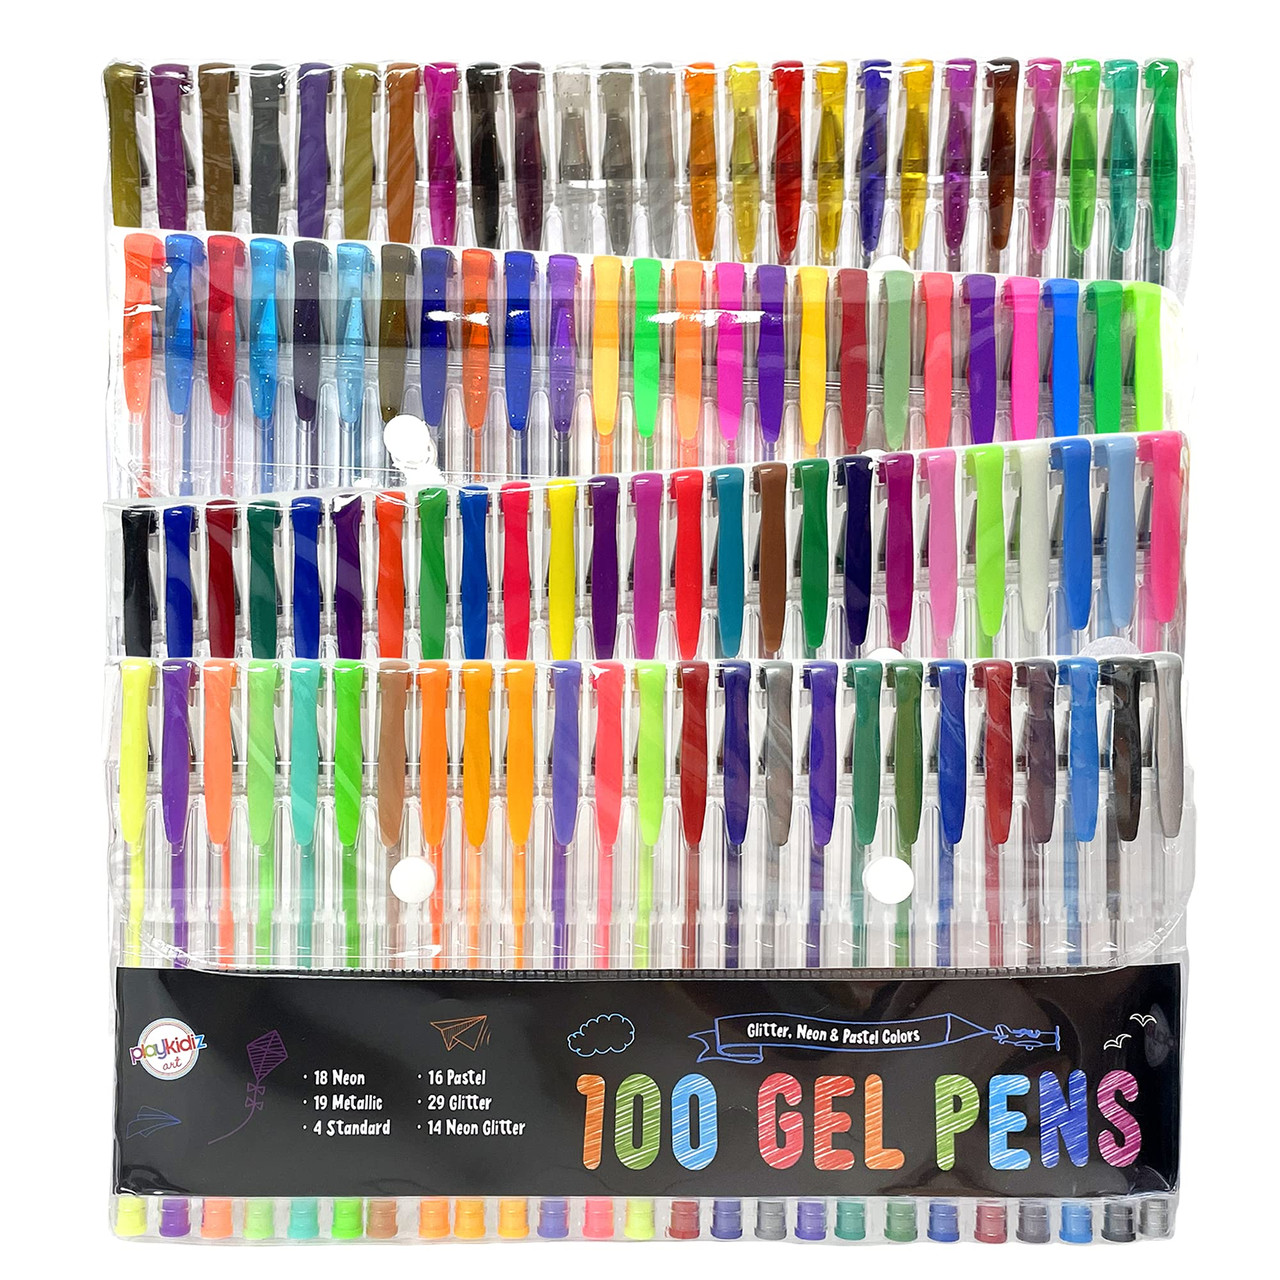 Crackles Neon Pens 48 Pcs Glitter Pens Set Gel Colour Pens Set Color  Stationary For Gift Colorful Pen Gift for Kids Coloring Sketching Painting  Drawing. : Amazon.in: Office Products